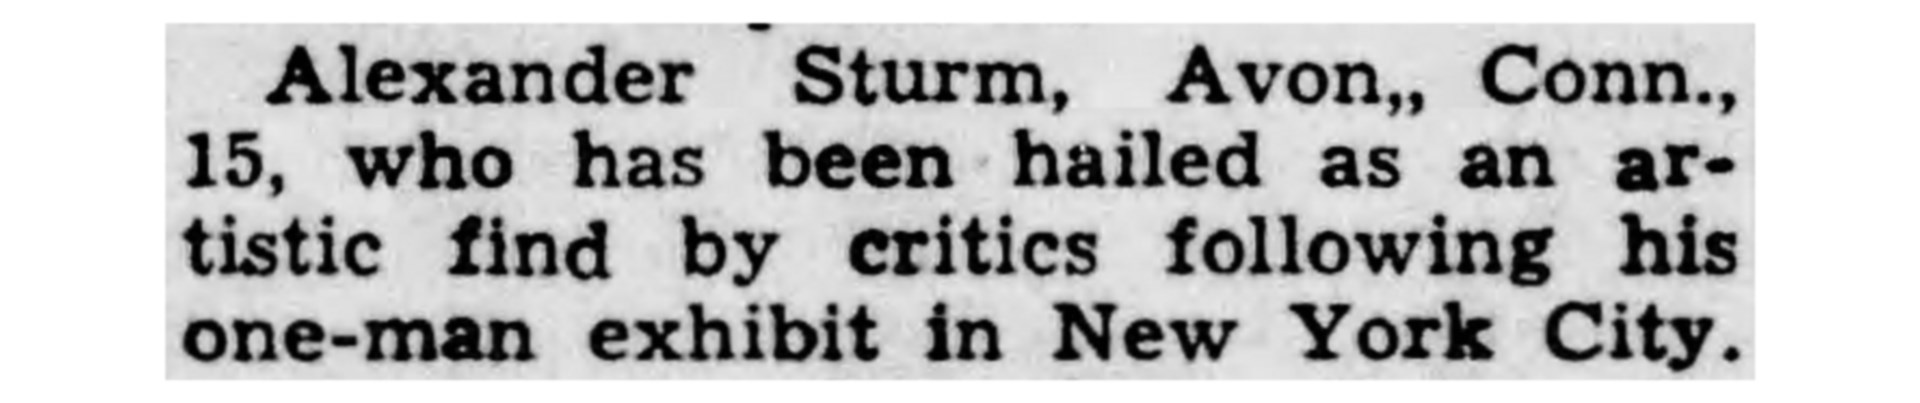 newspaper clipping text on image about Alexander Sturm